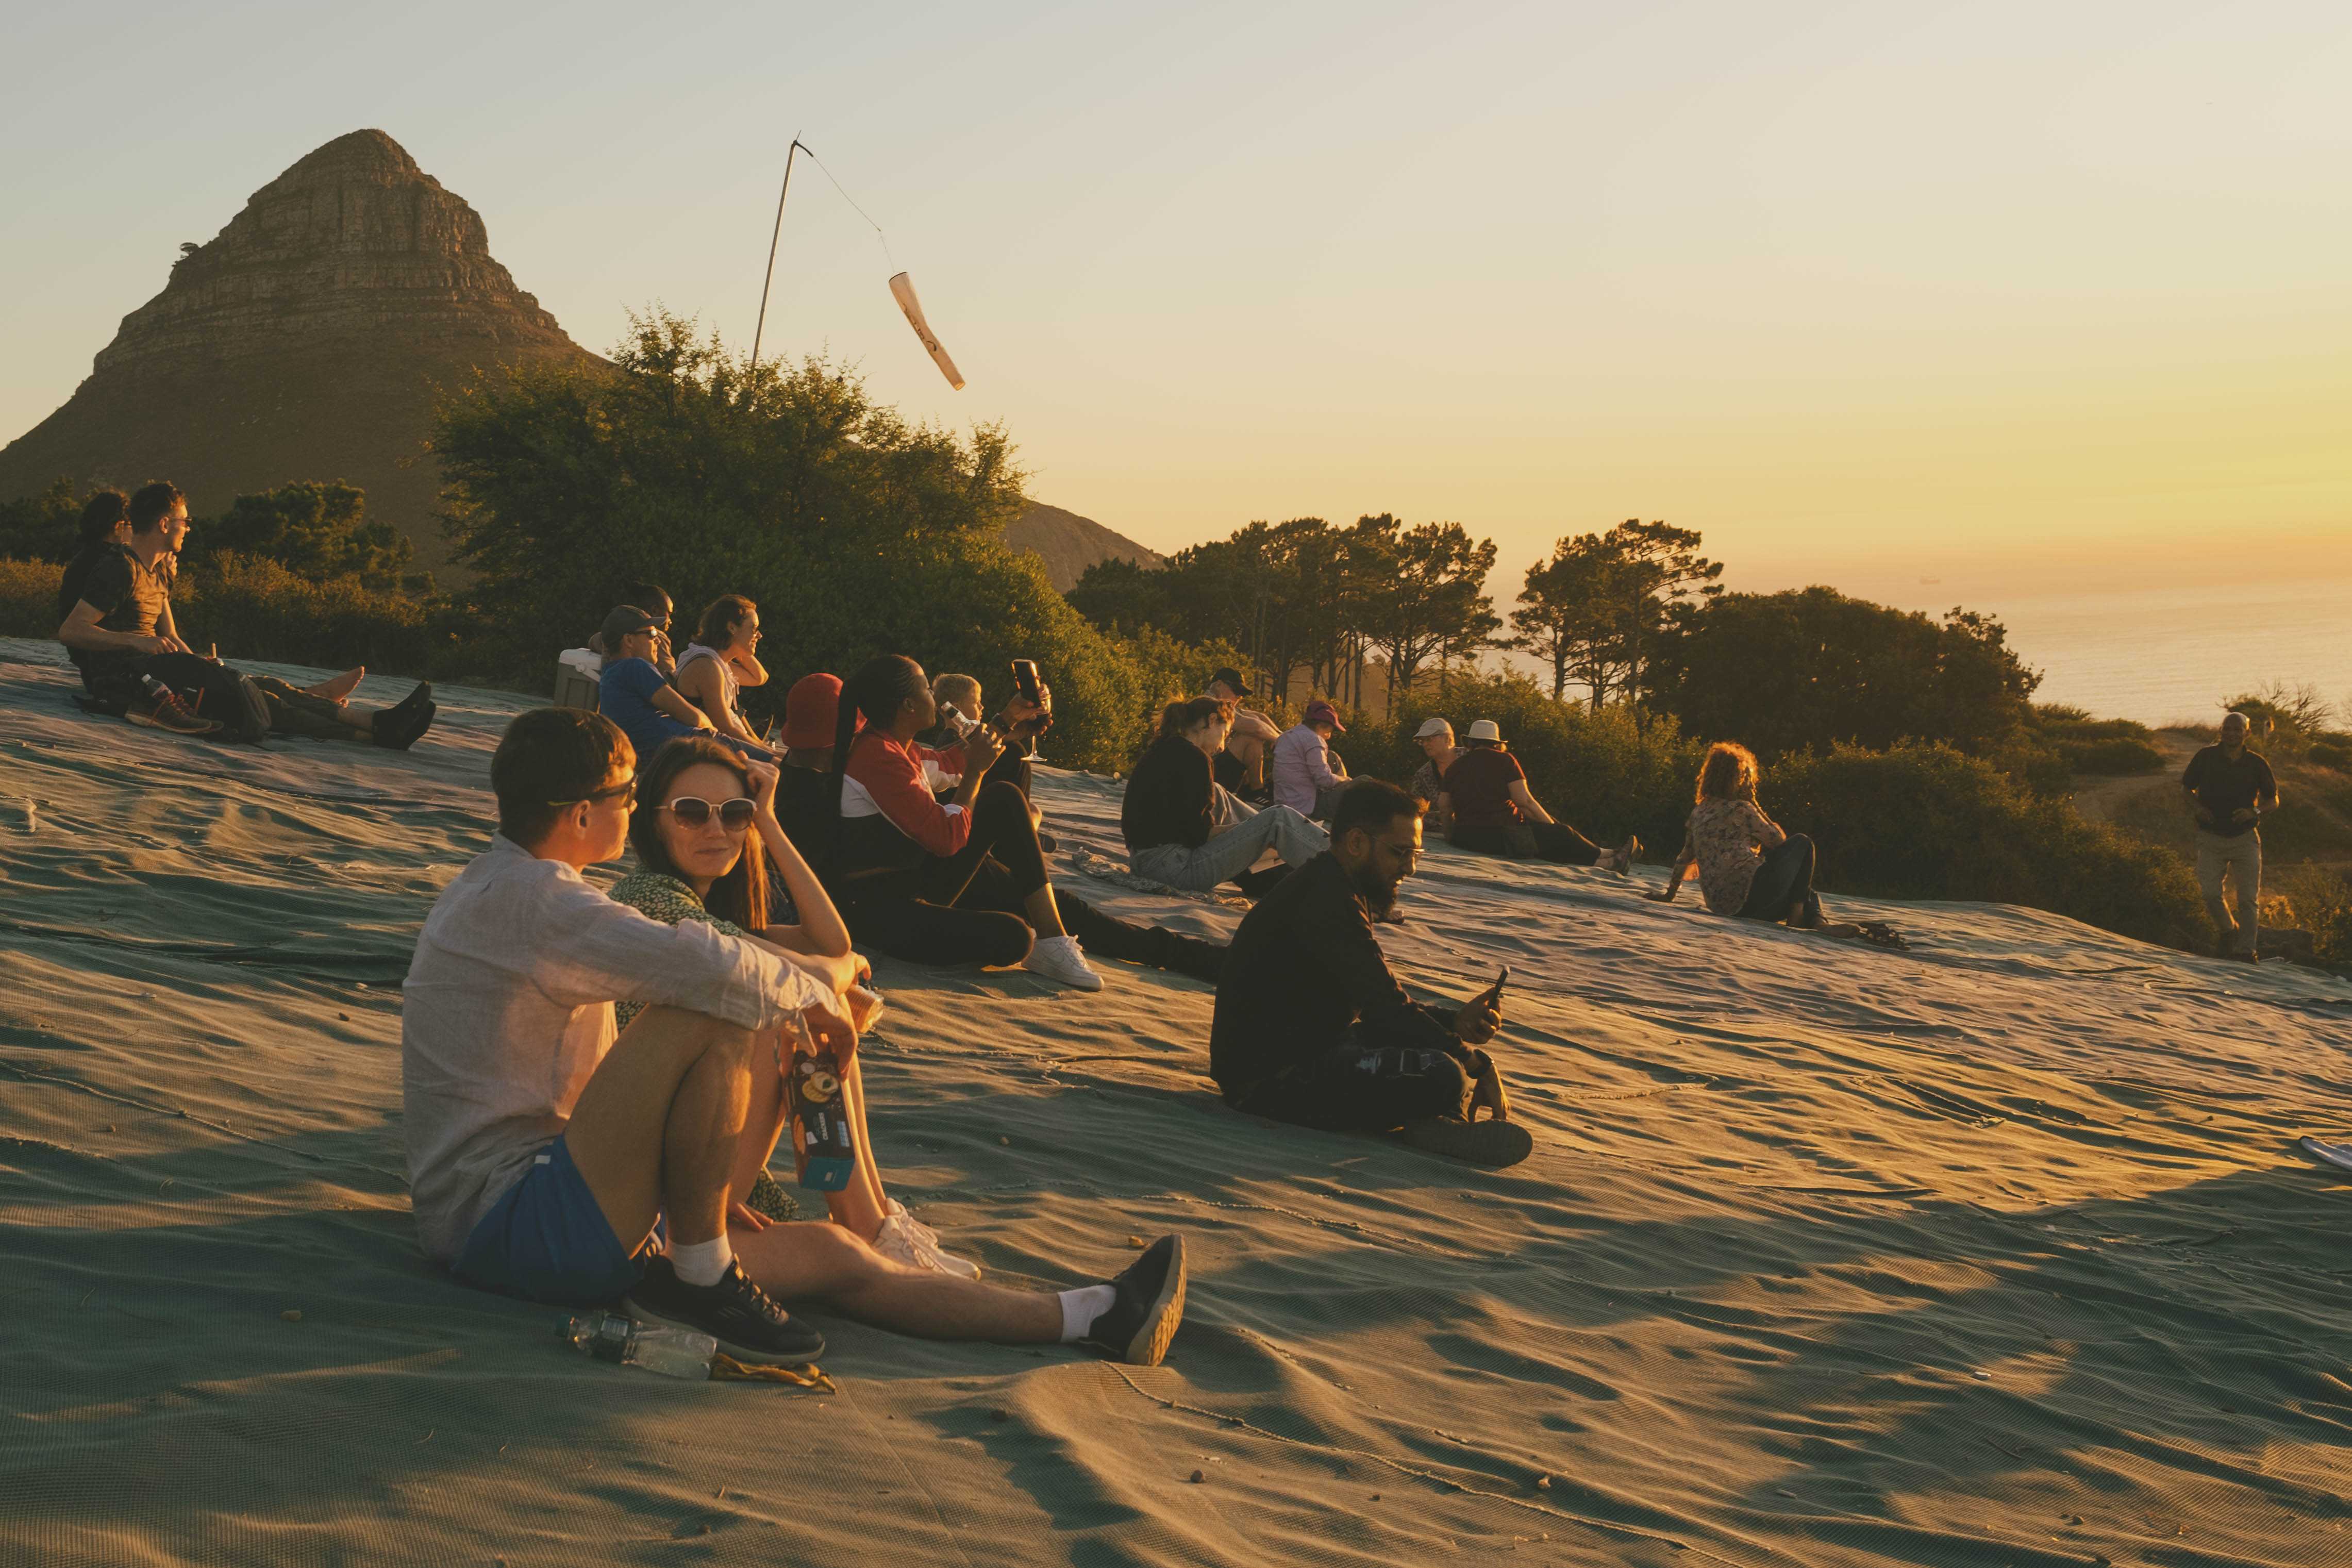 People watching the sunset on a slope with Lion's Head Mountain in the background